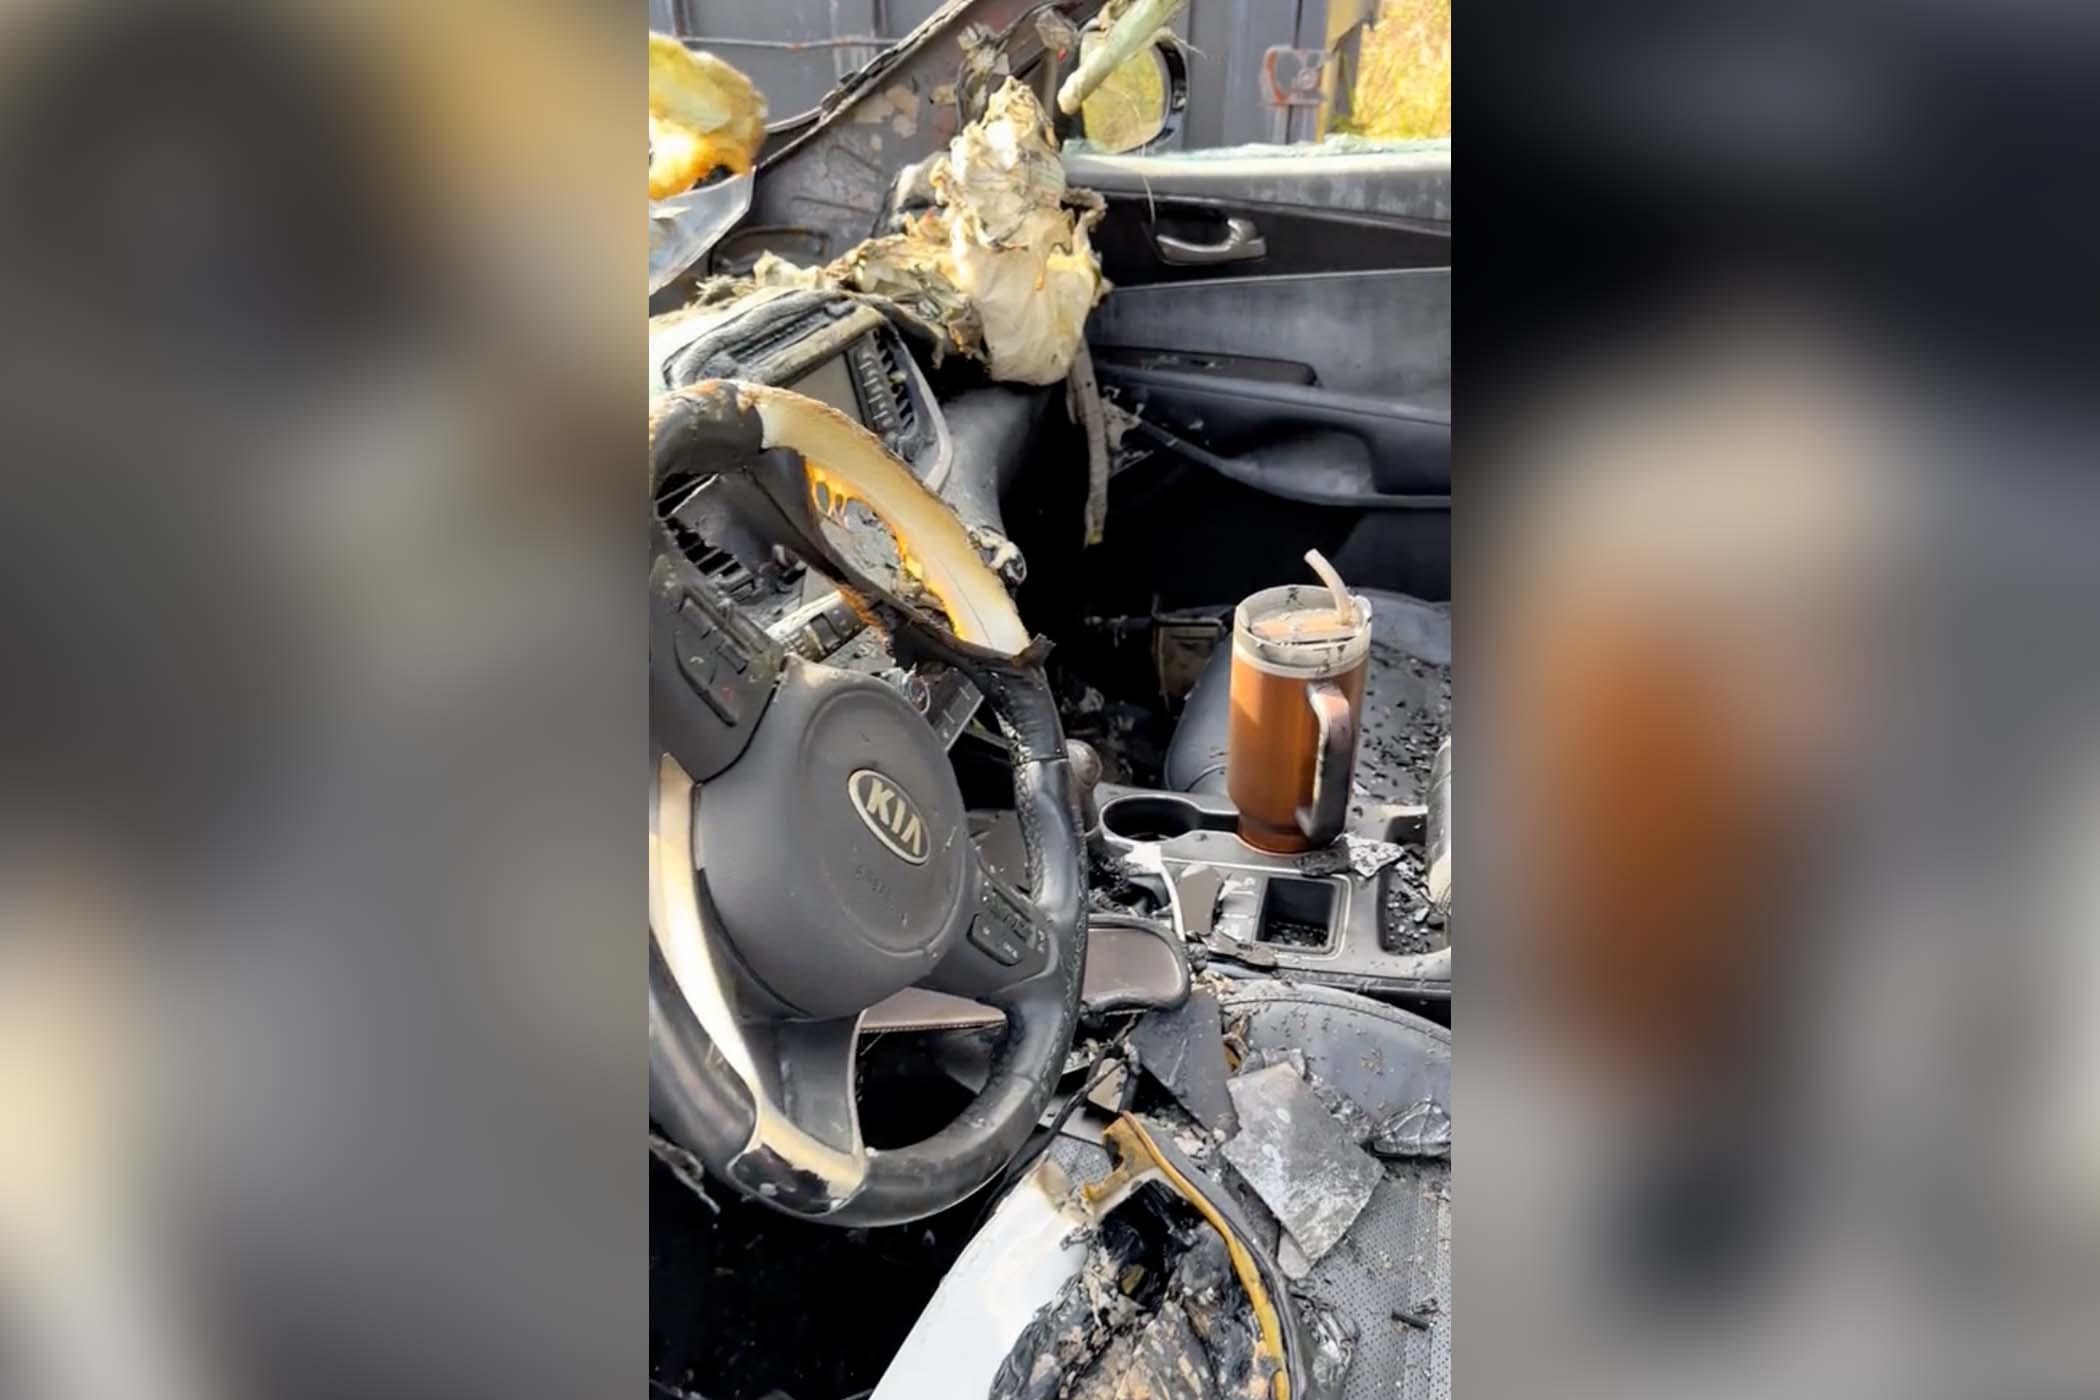 Travel mug survives car fire, supplier buys owner a new car